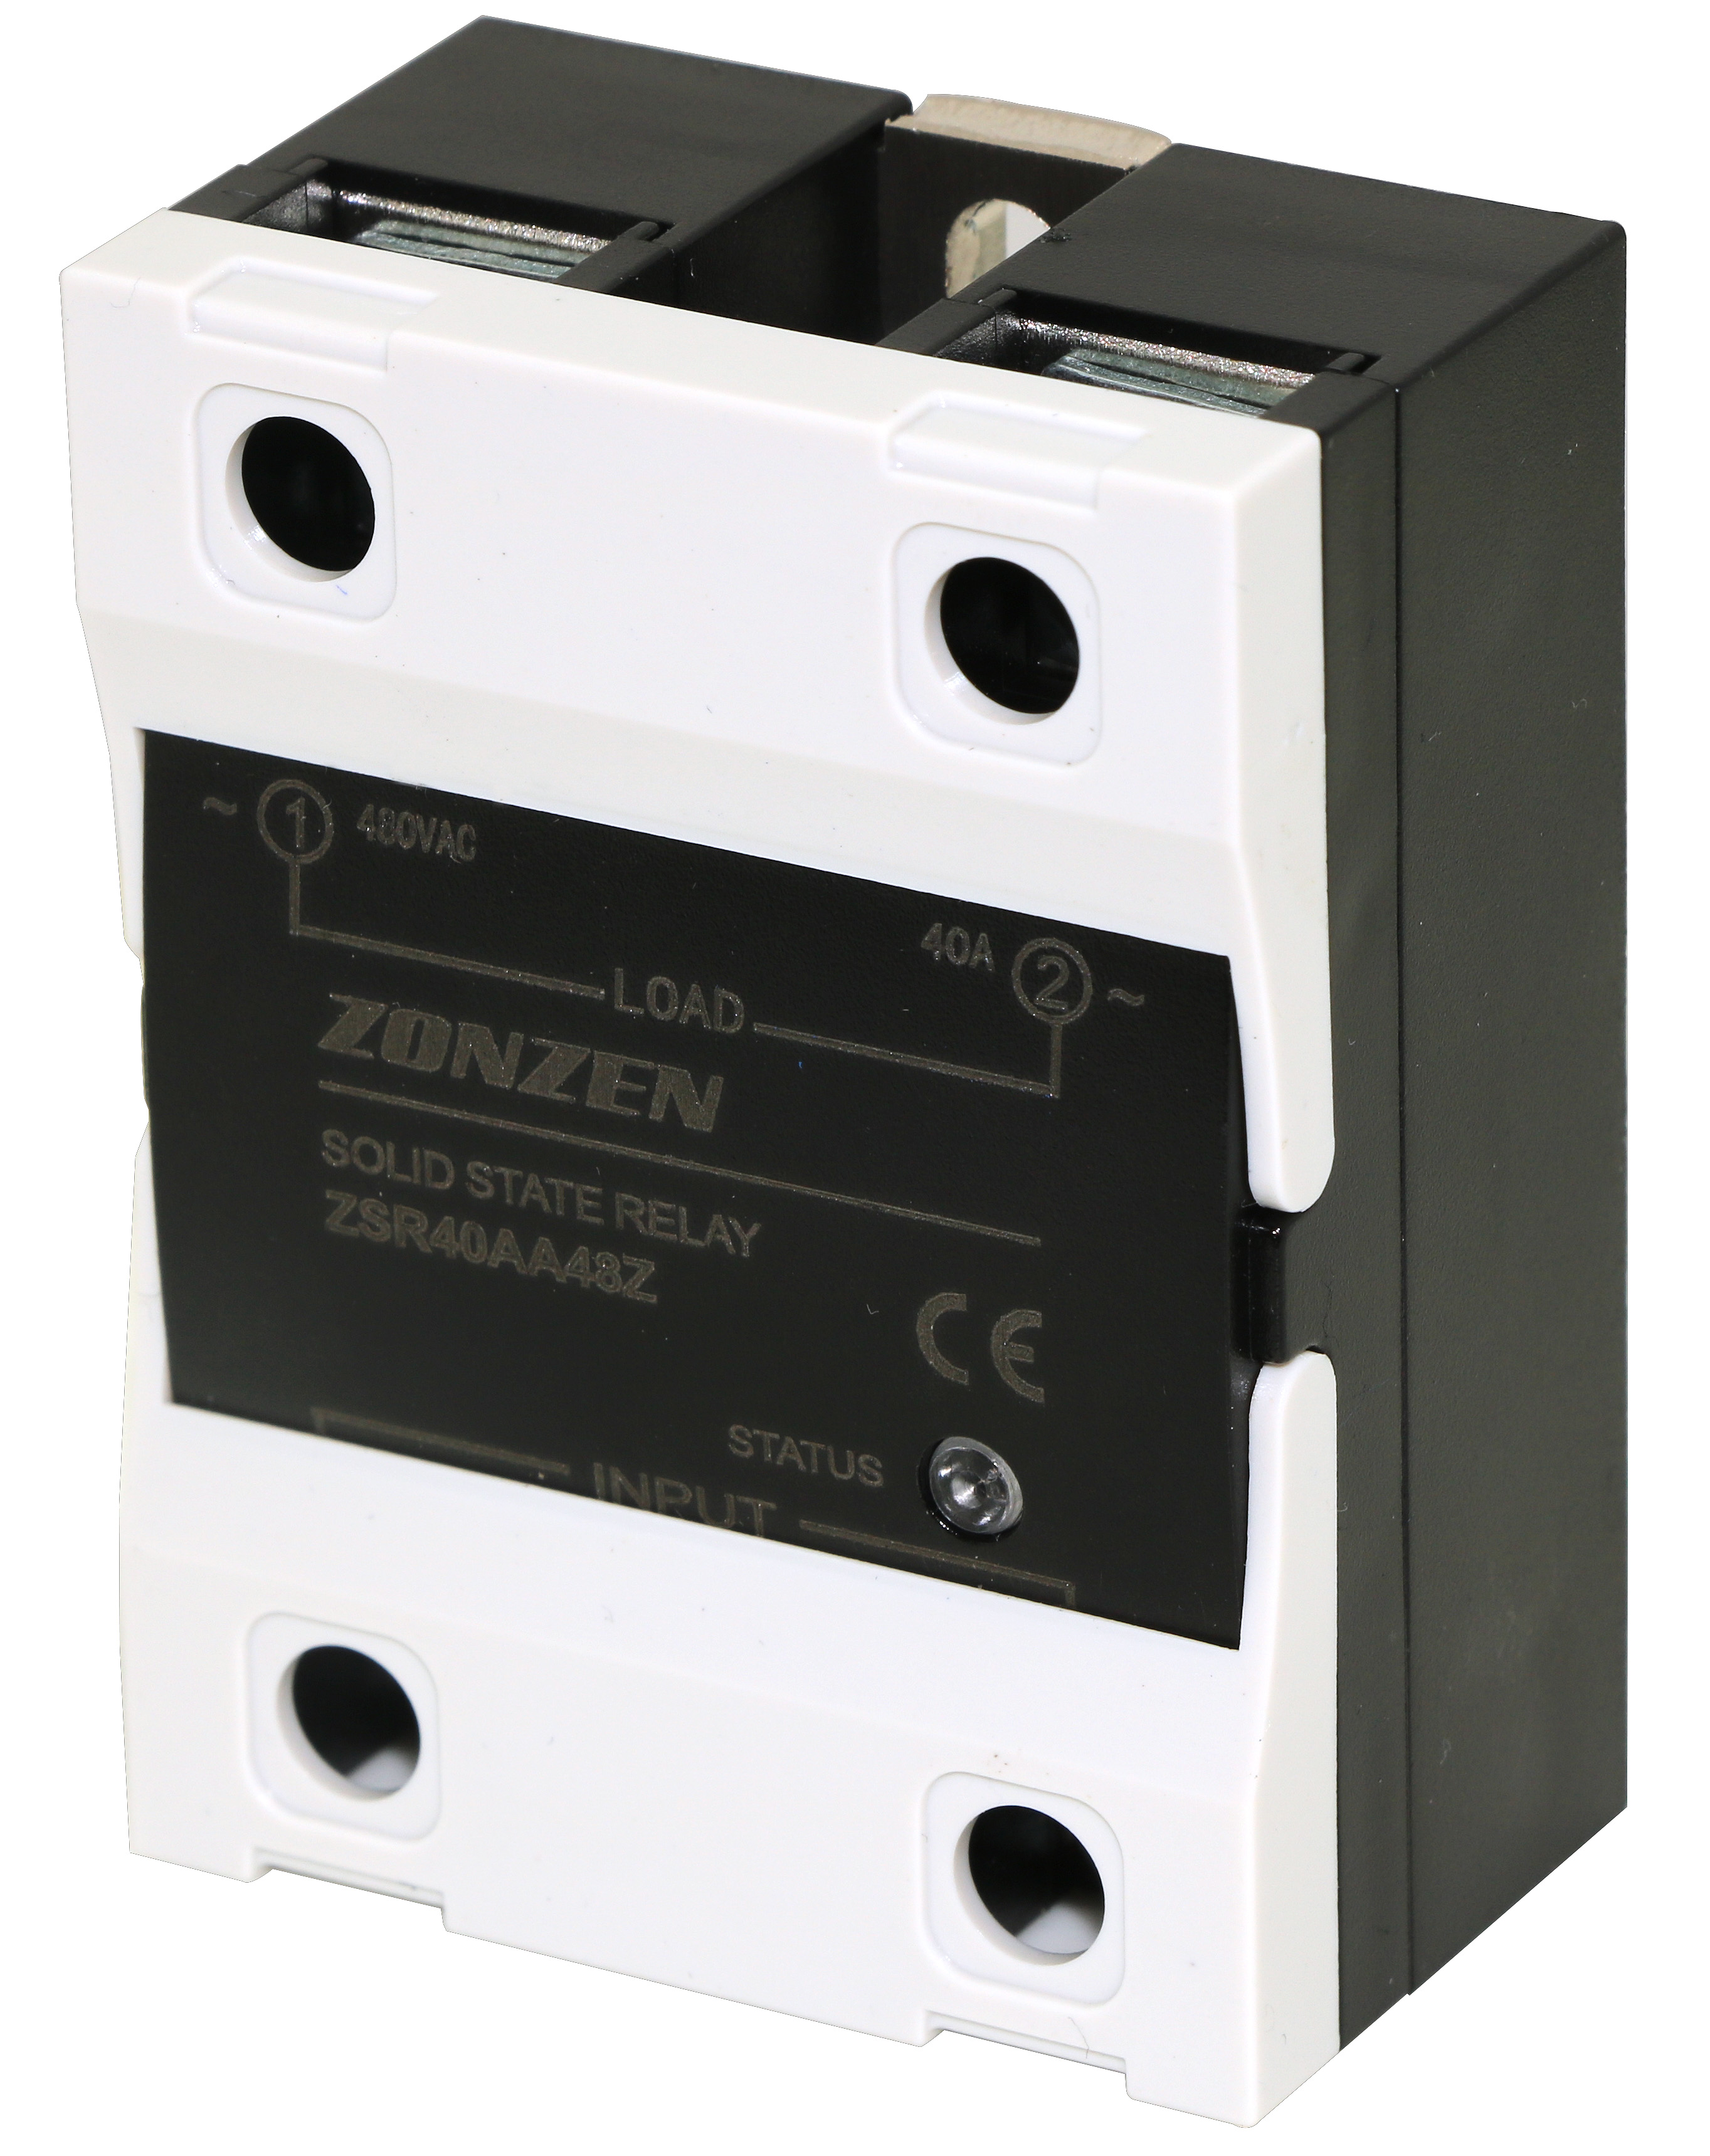 DC to AC Single phase solid state relay(Black)